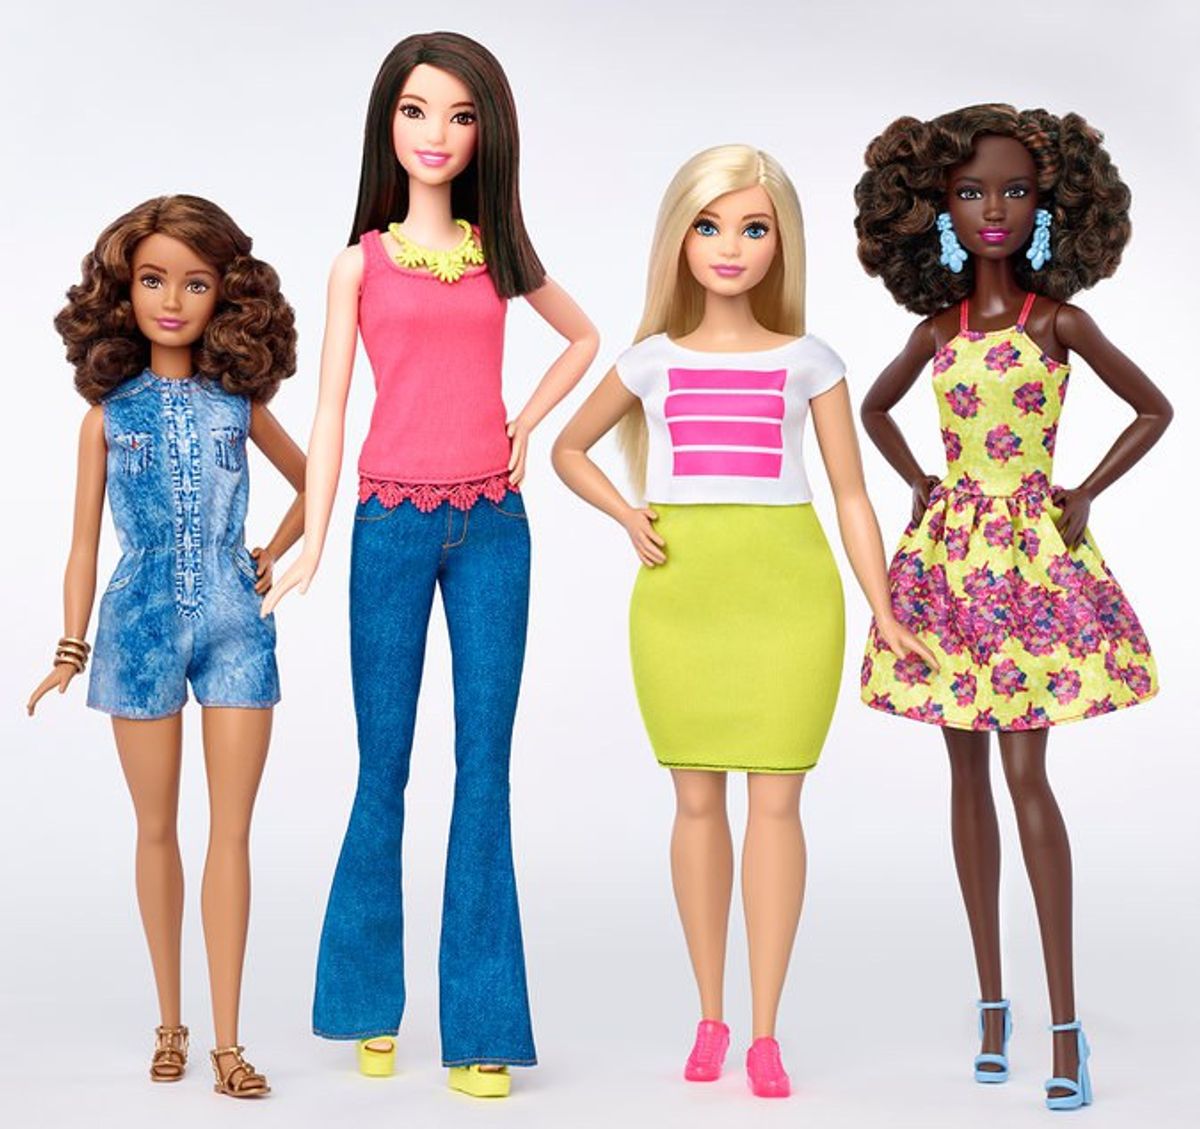 Barbie's New Shapes: Mattel Gives Barbie A More Relatable Look